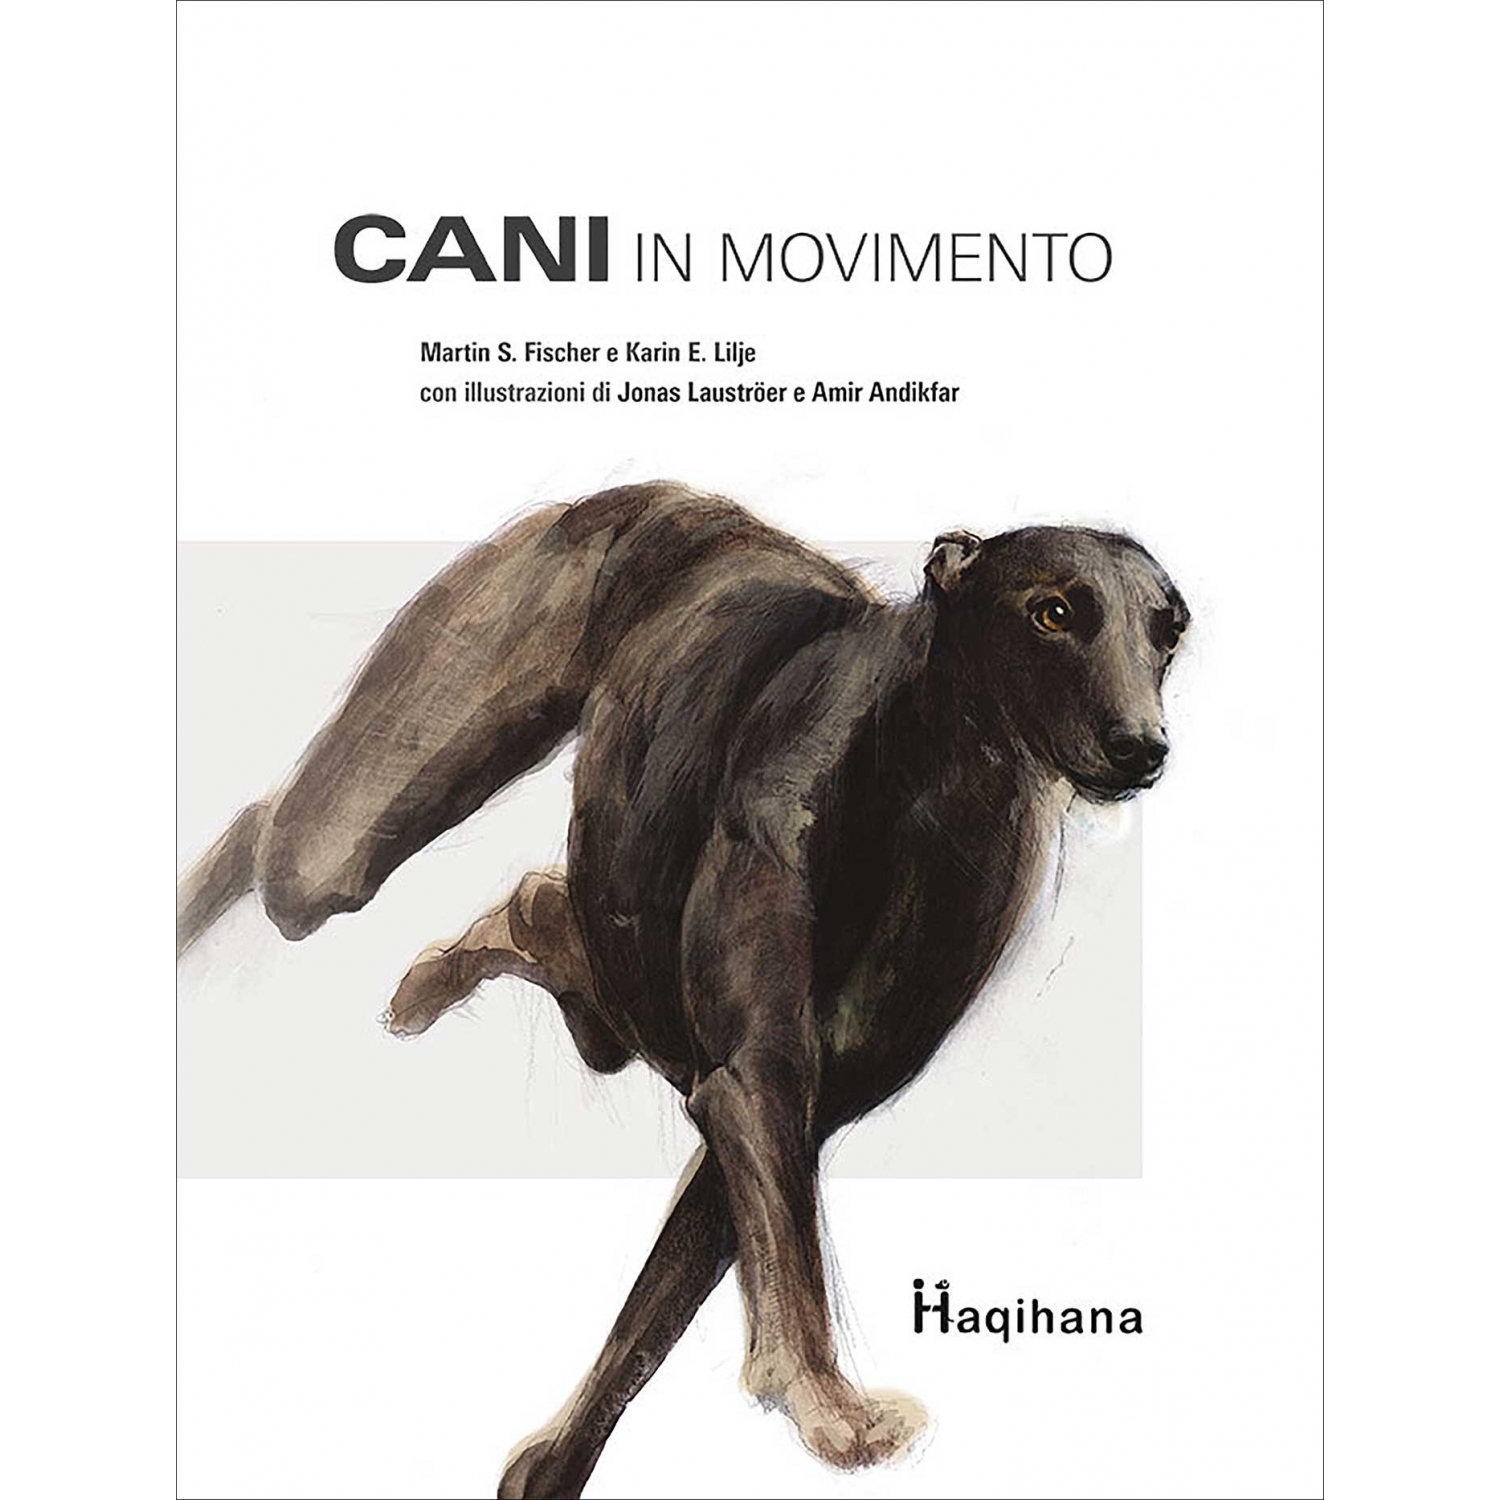 Cani in movimento (italian only)